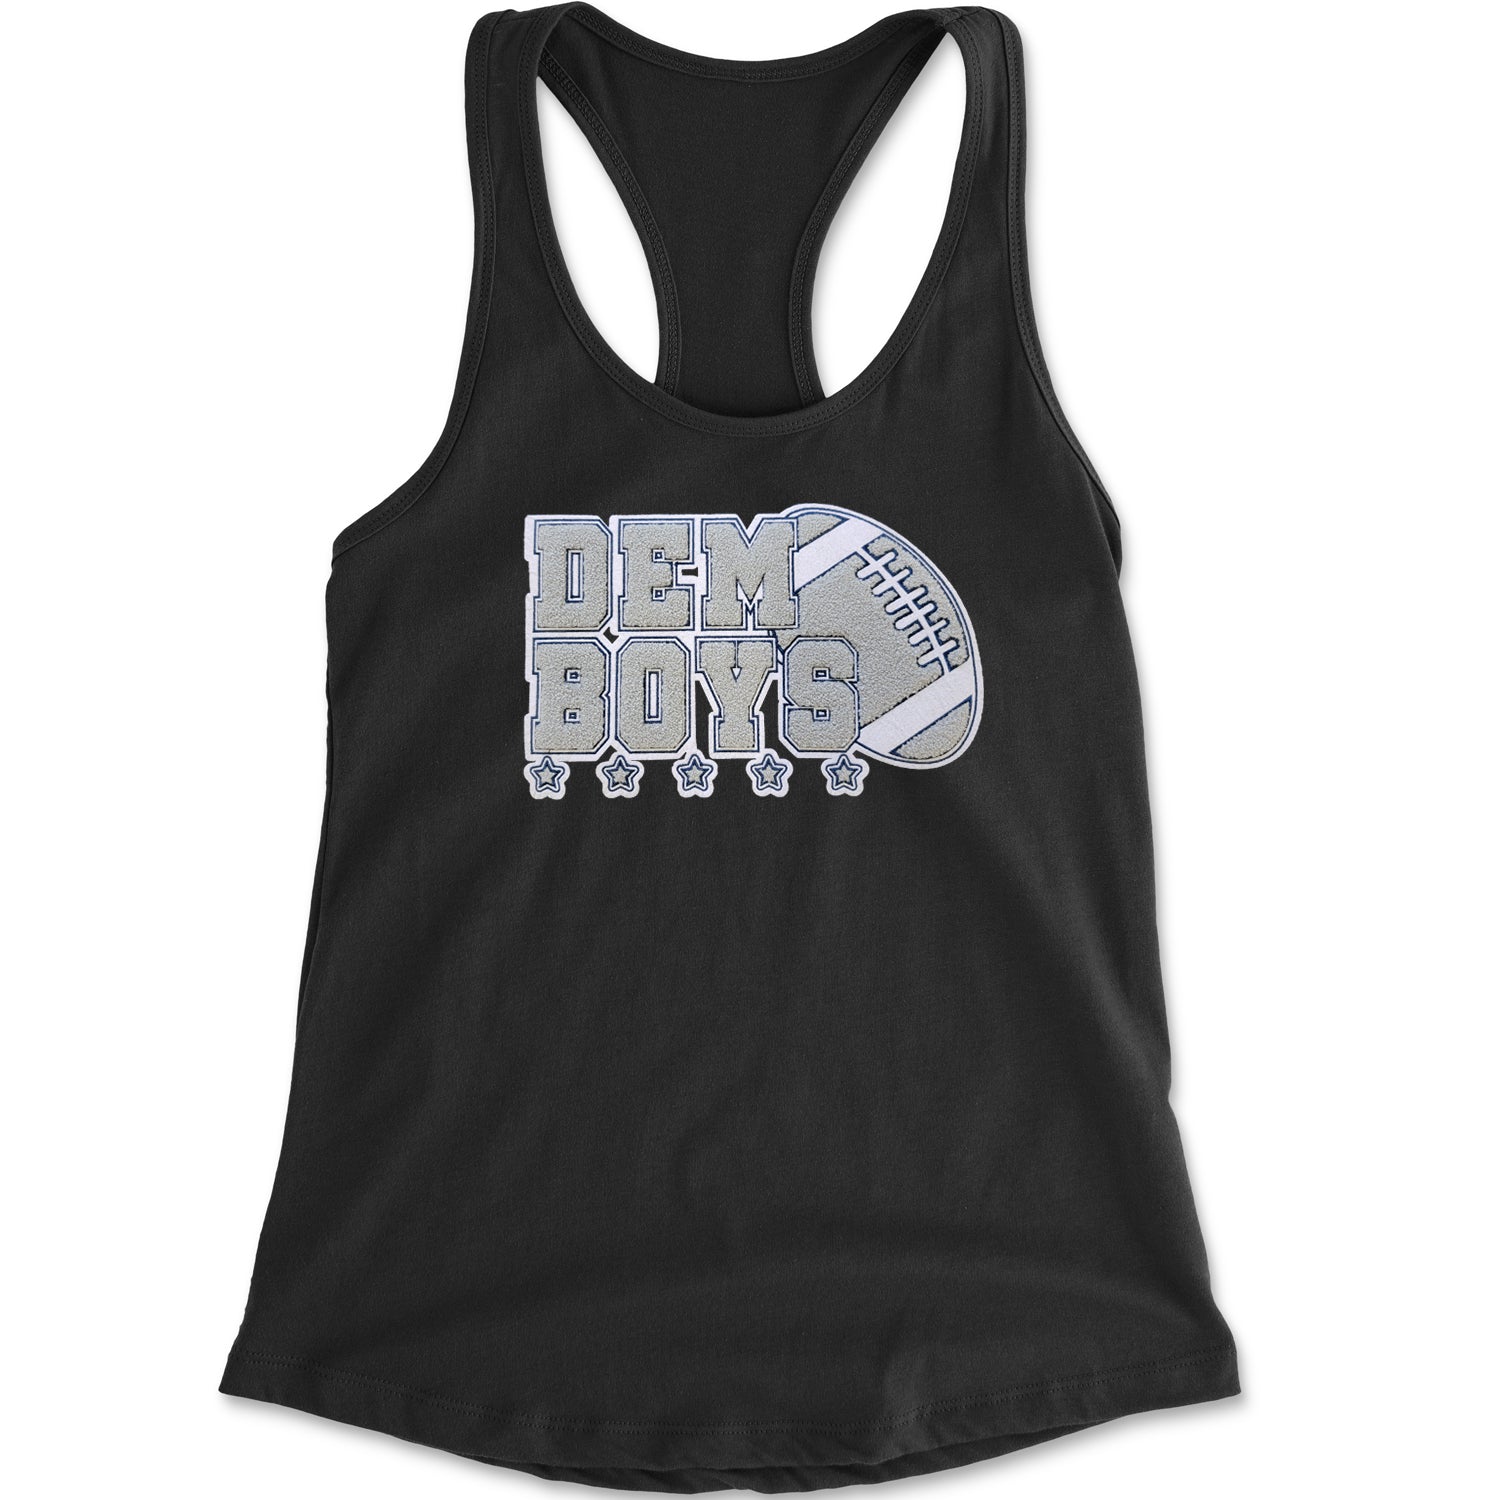 Dem Boys Embroidered Patch 2 Racerback Tank Top for Women dallas, fan, jersey, team, texas by Expression Tees